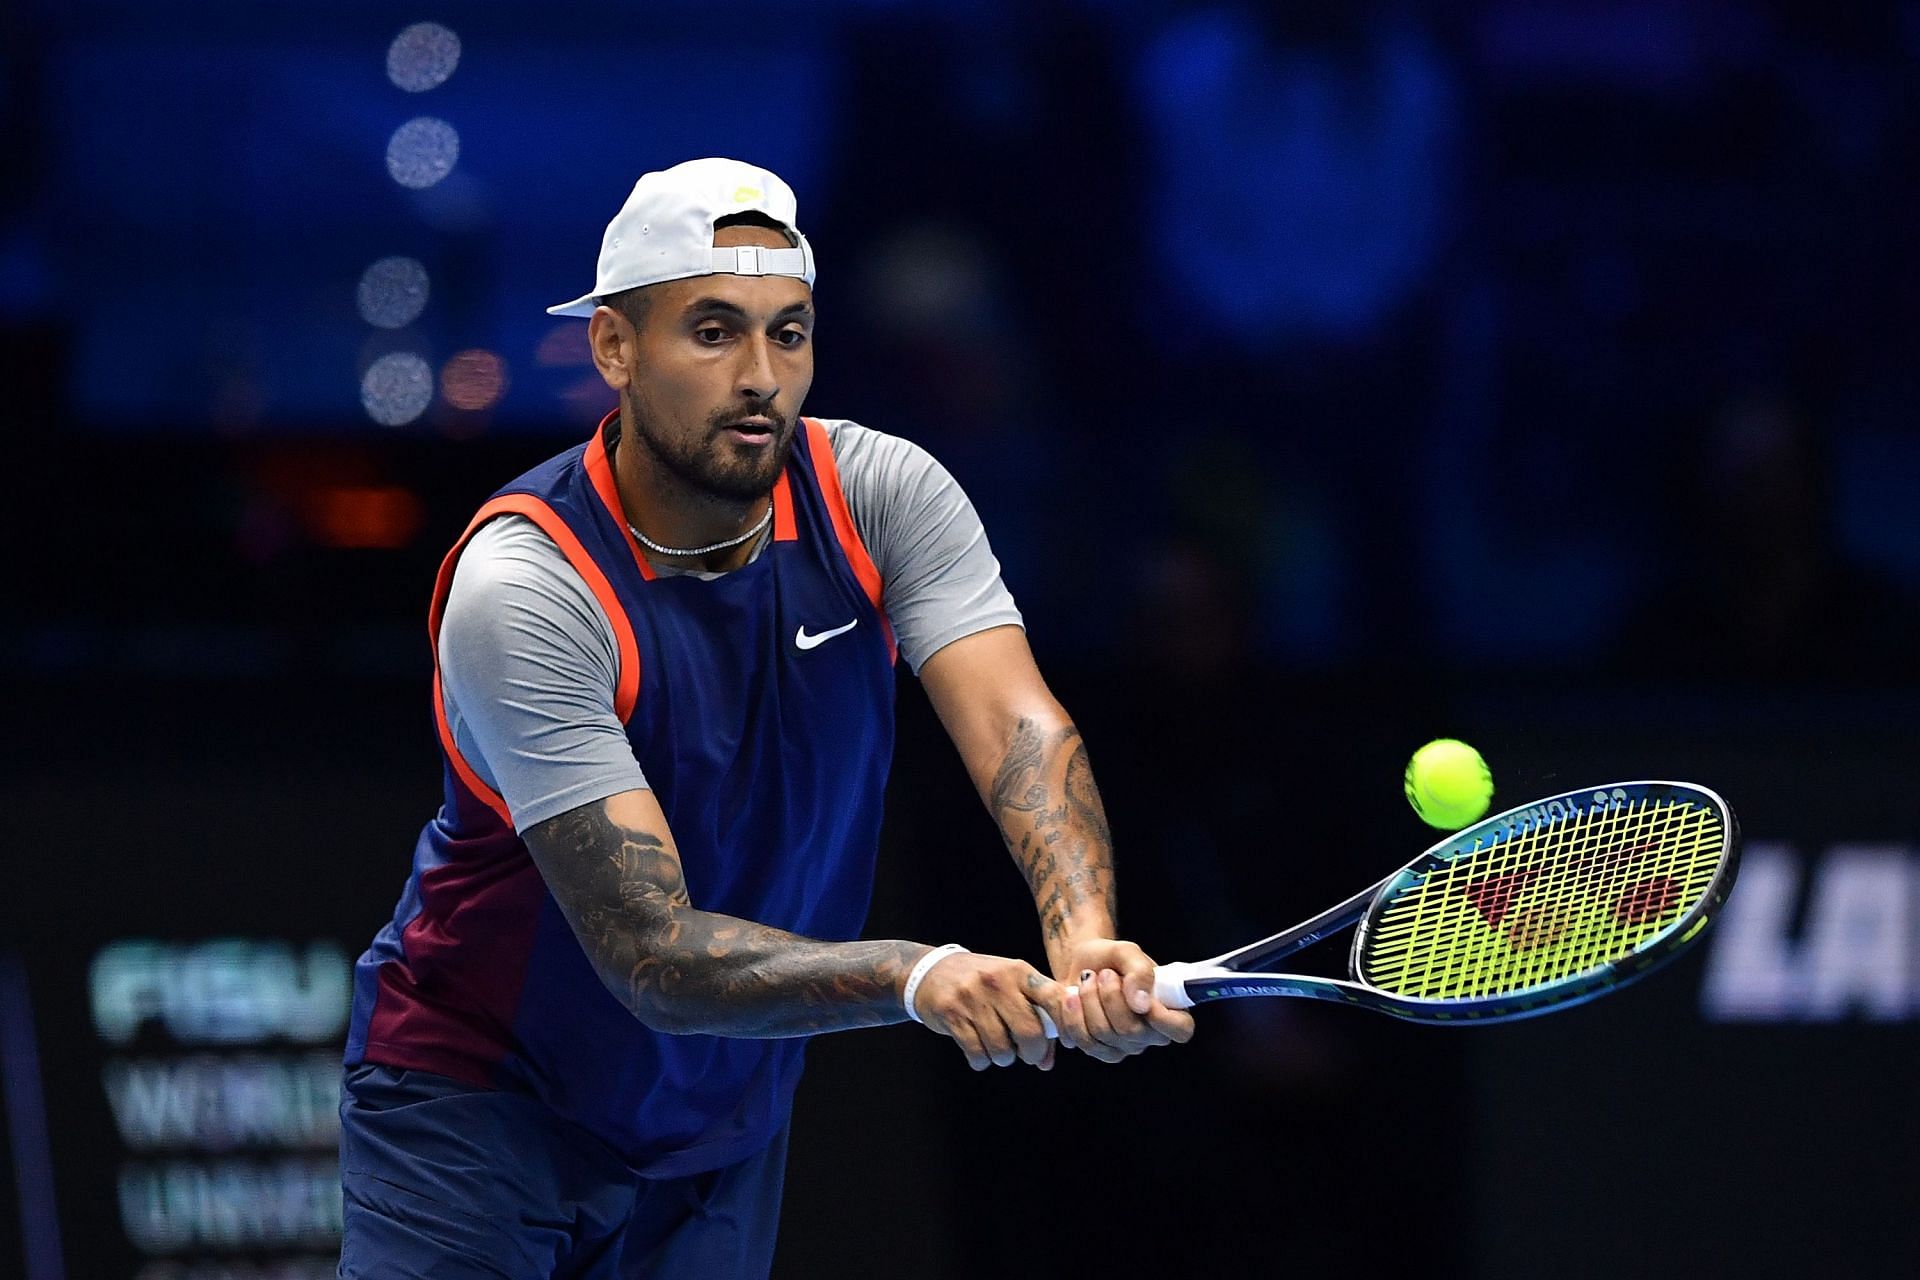 Nick Kyrgios is ranked 22nd in the world